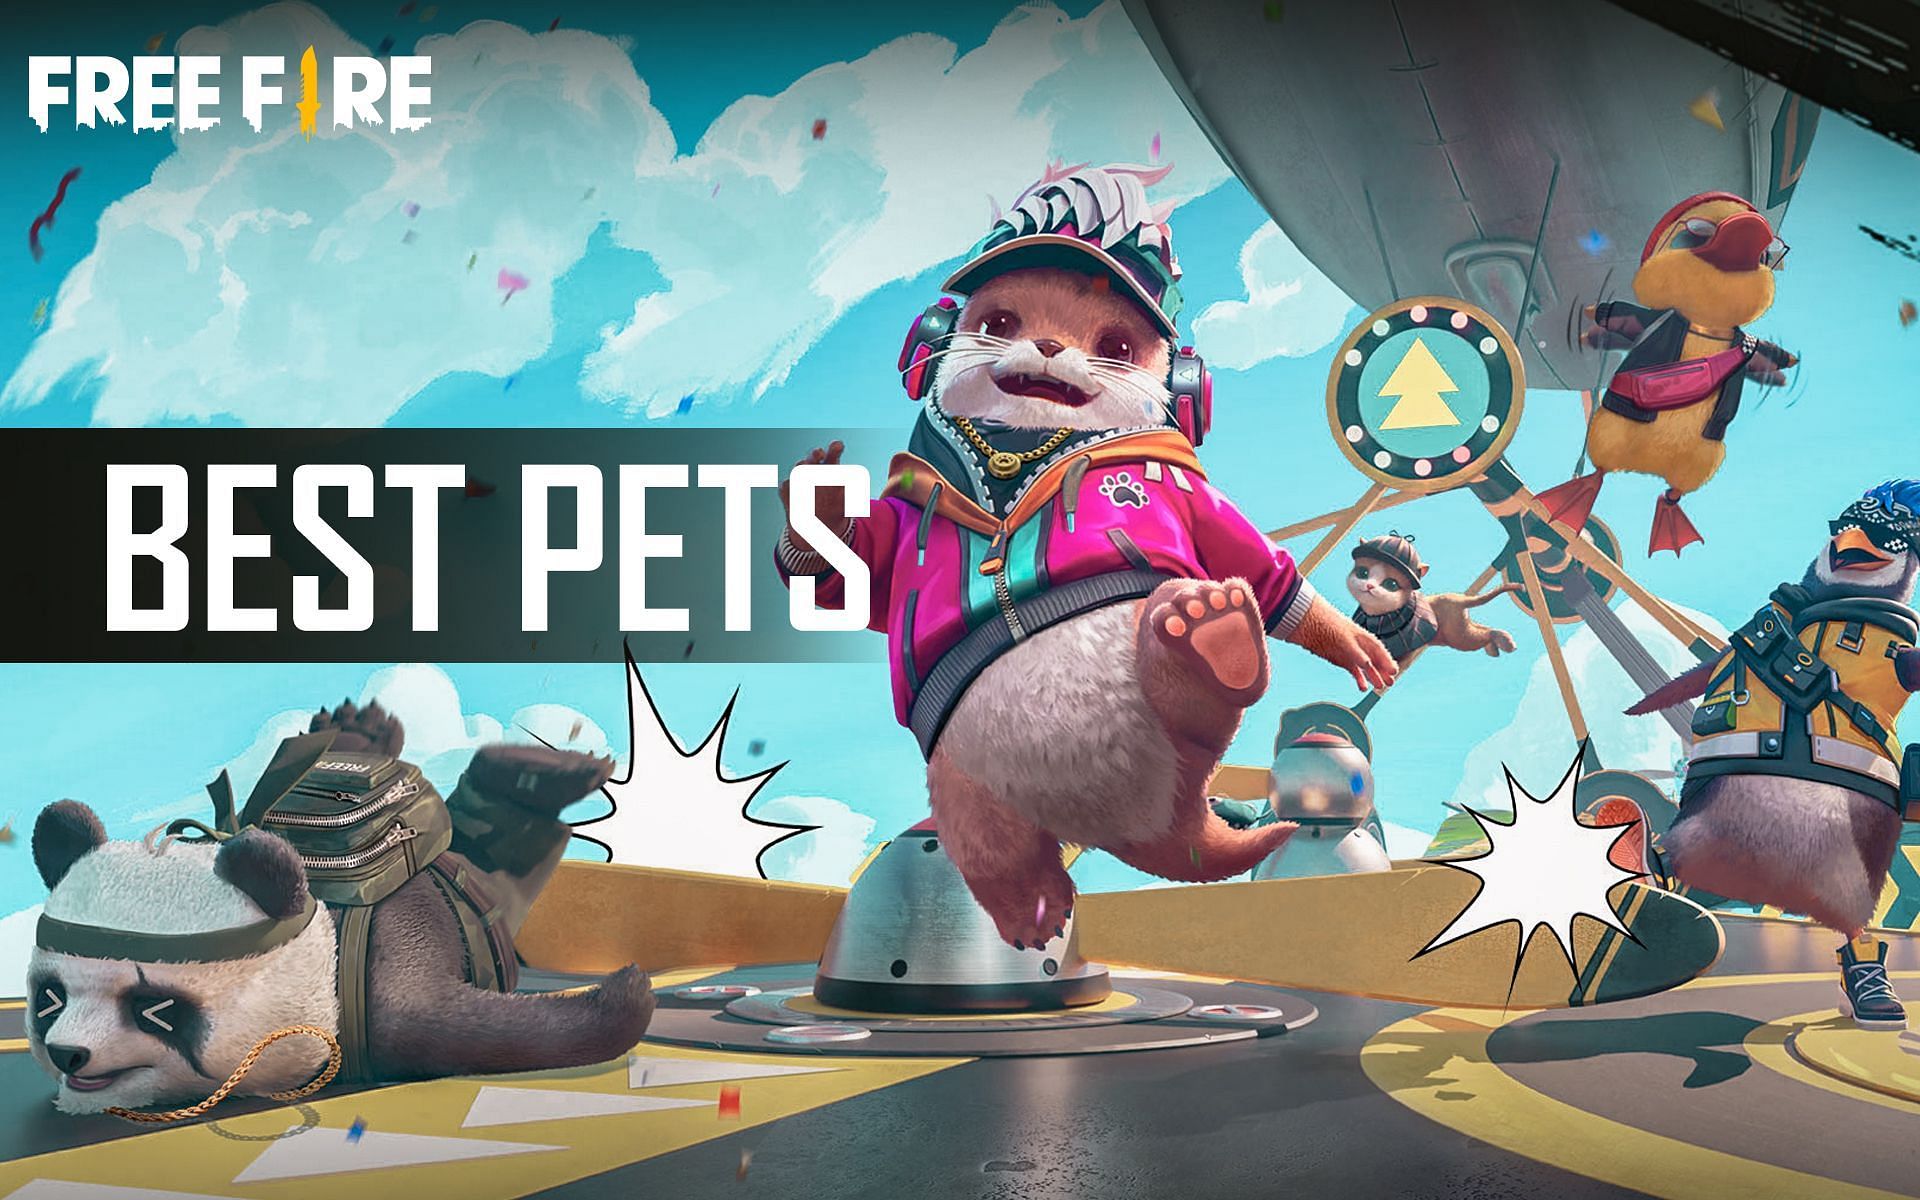 Best pets for Otho in Free Fire (Image via Garena)